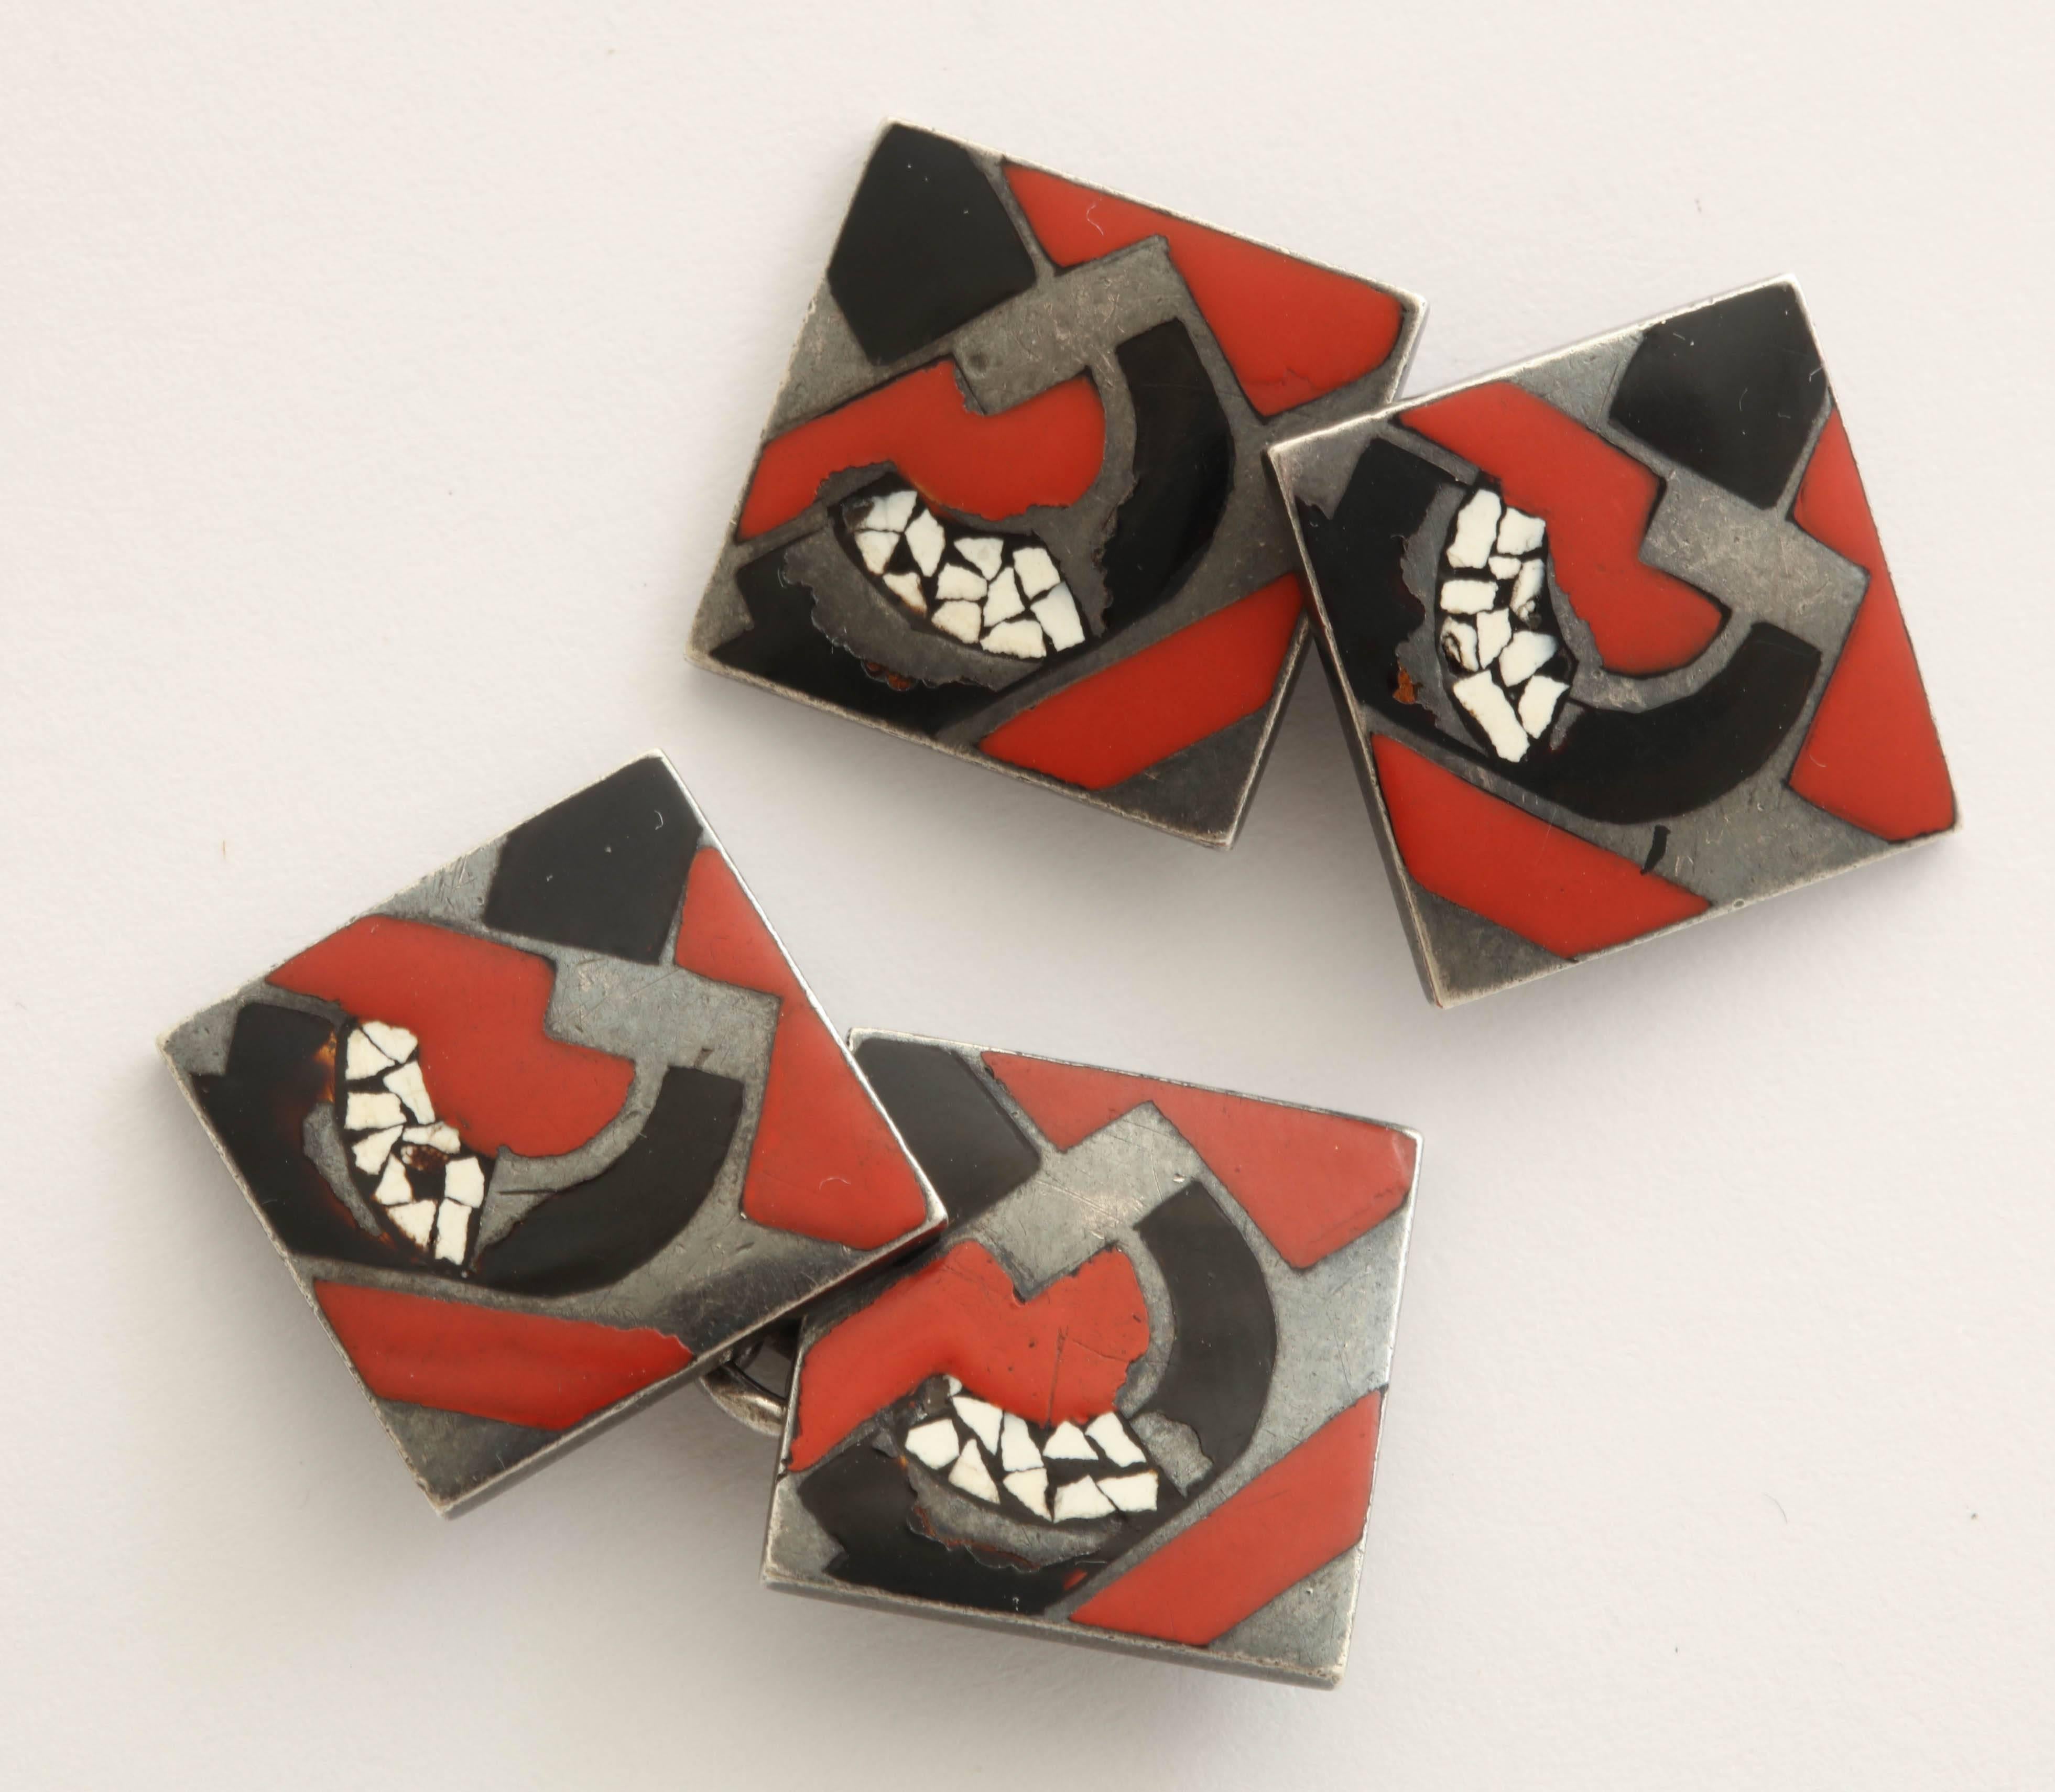 The square cufflinks with red, black and eggshell lacquer applied in geometric motifs.
Signed Gerard Sandoz, with French assay and workshop marks.